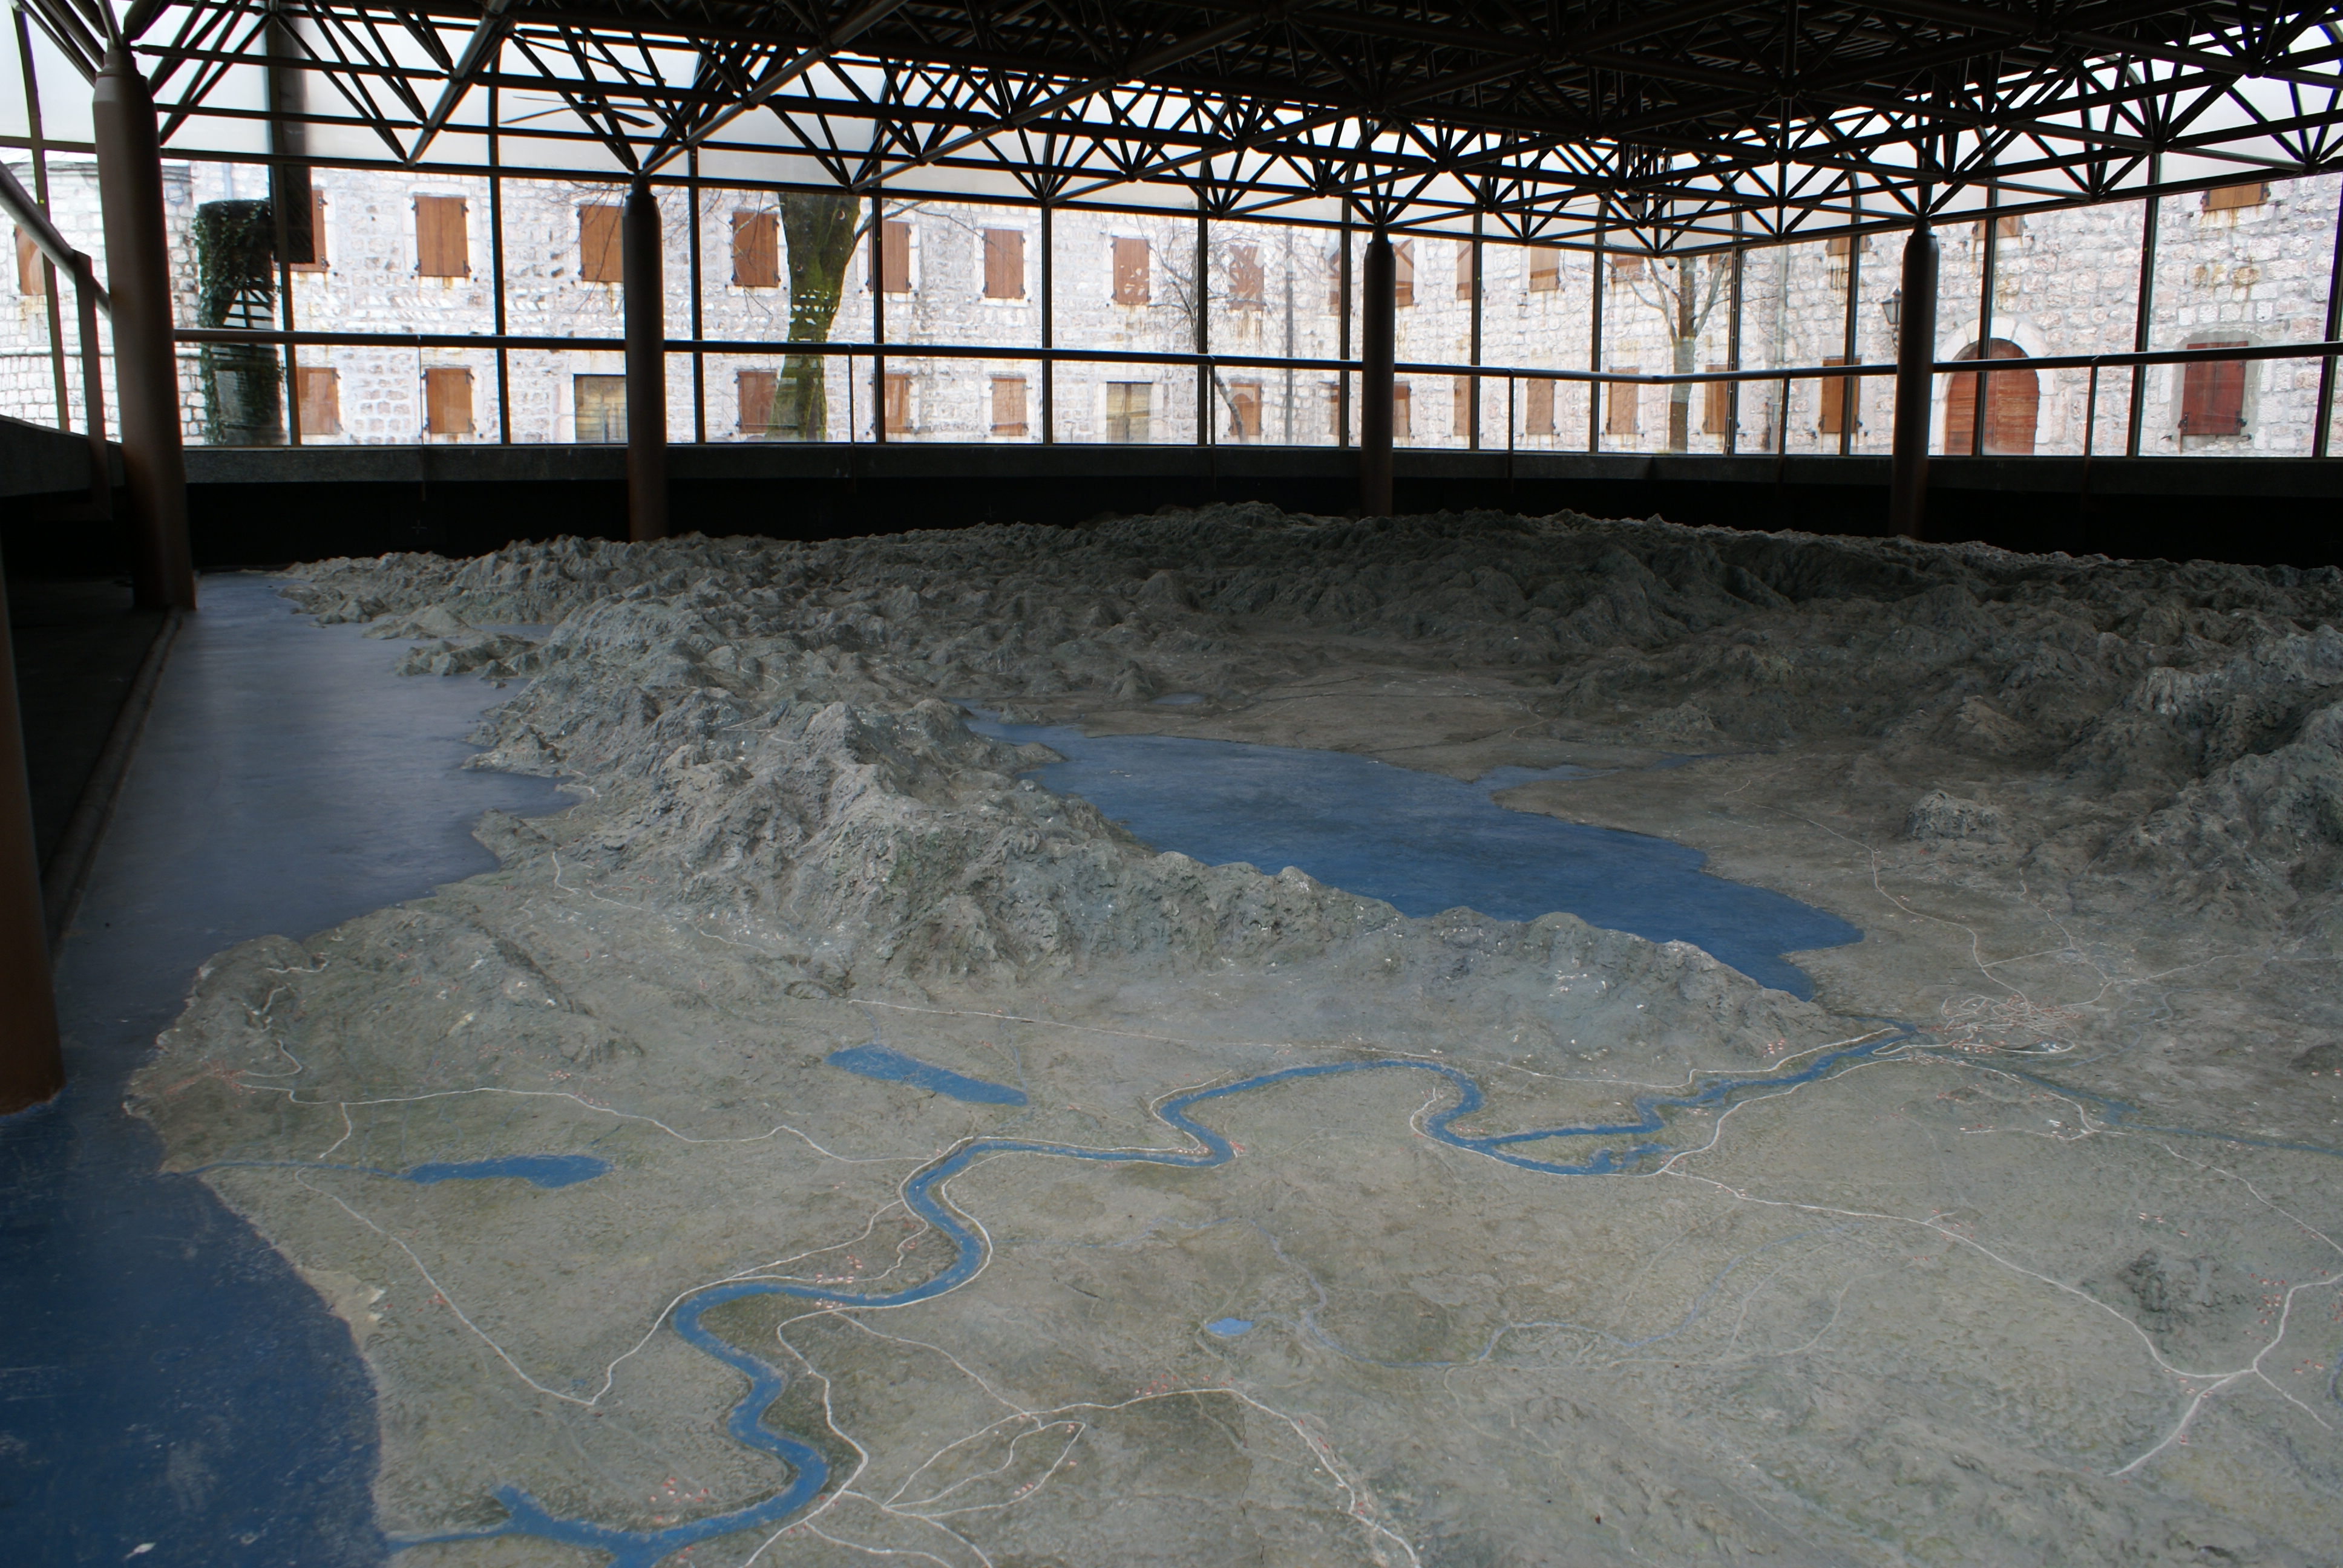 The relief map of Montenegro, in the foreground Lake Skadar, Cetinje, Republic of Montenegro